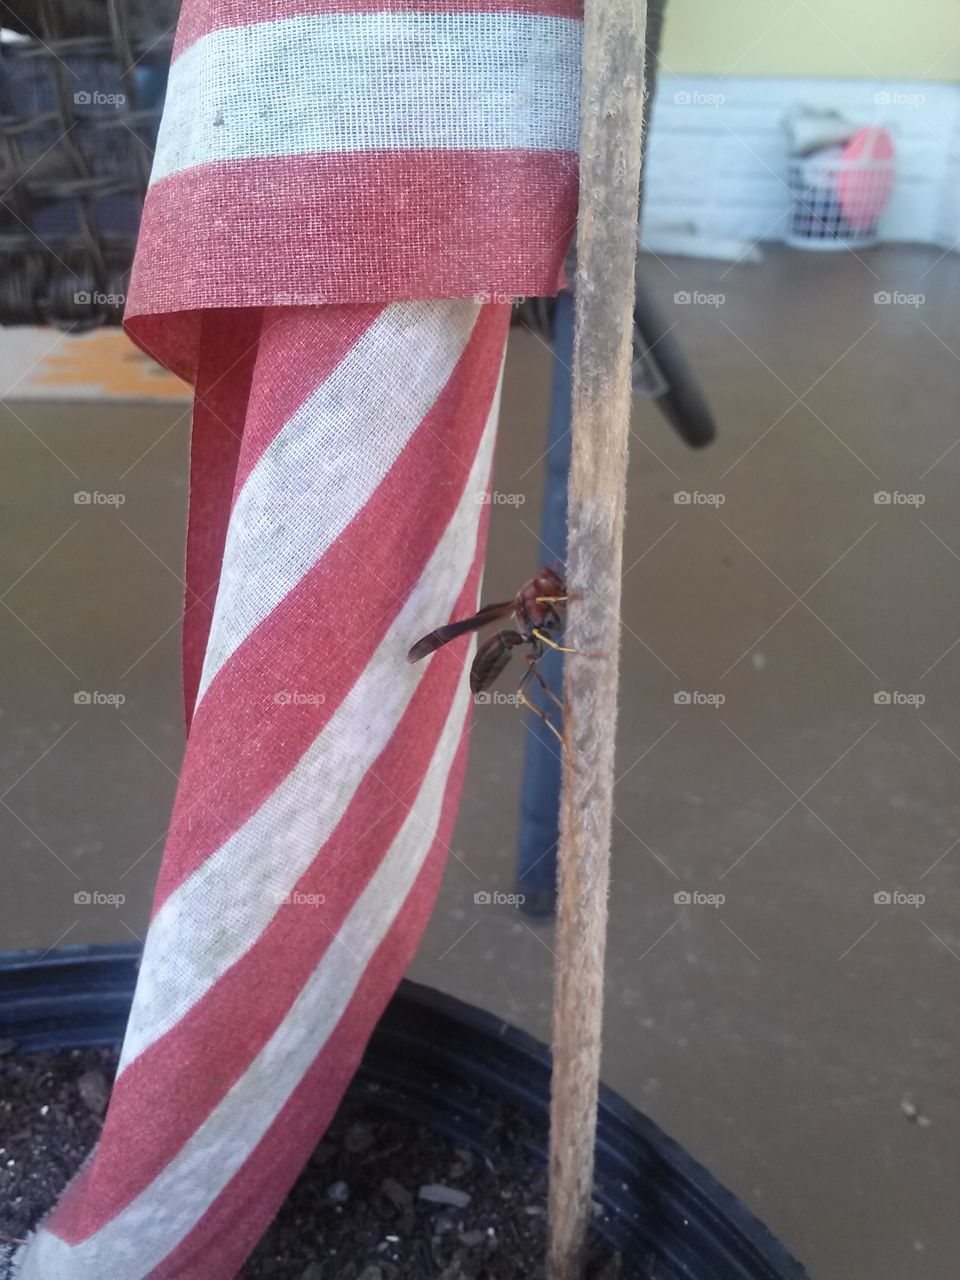 wasp on a flag pole. flag post with a wasp